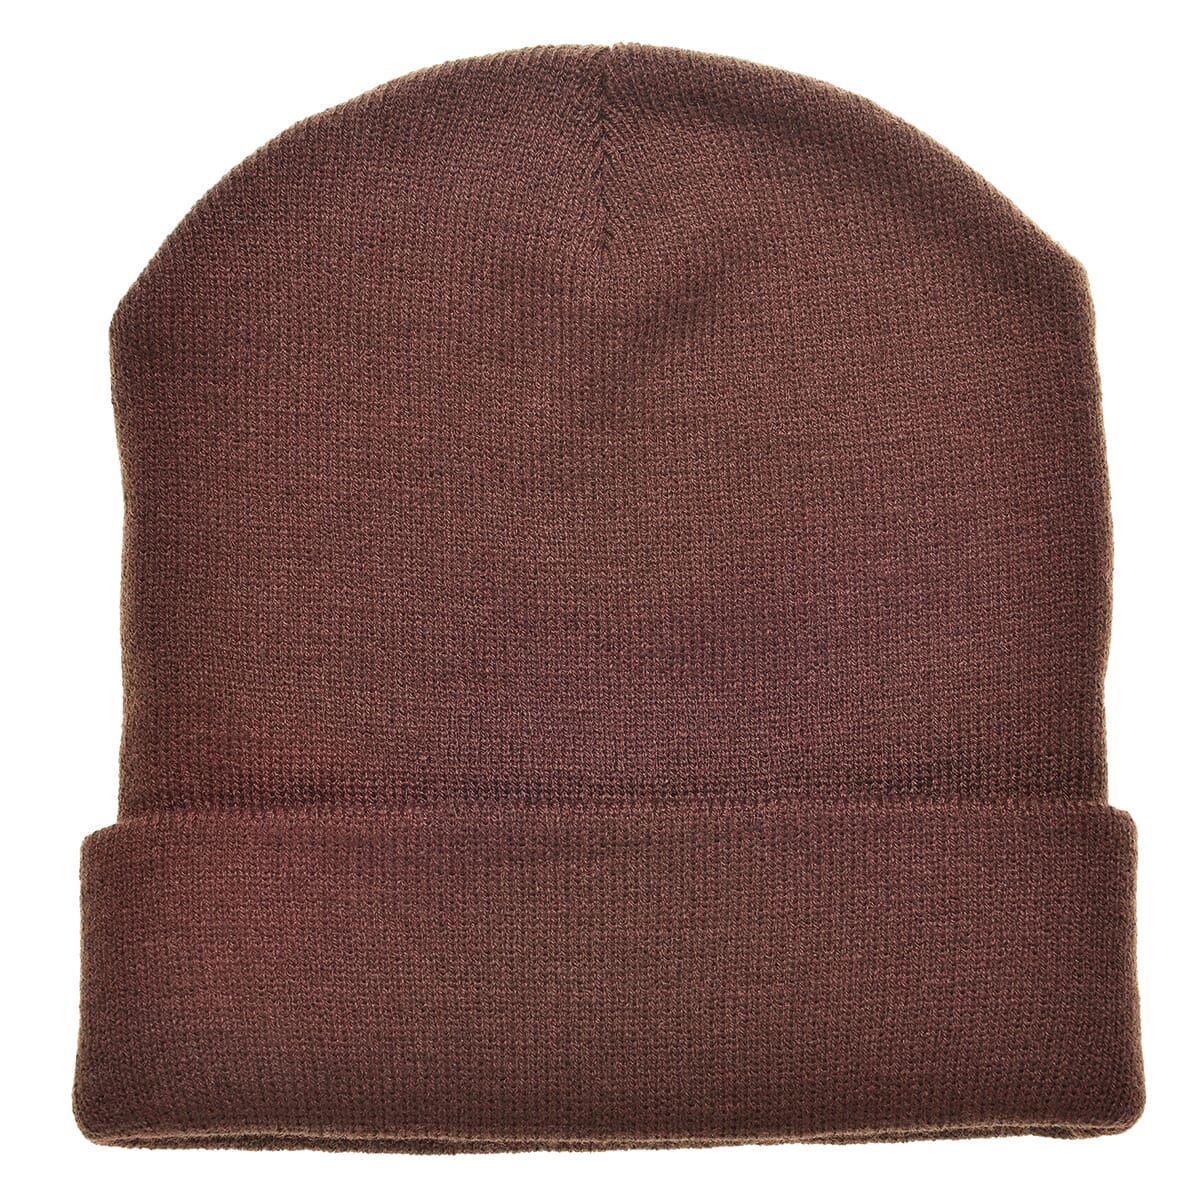 This is a promotional knitted hat that comes with the option for embroidery. - Selkirk